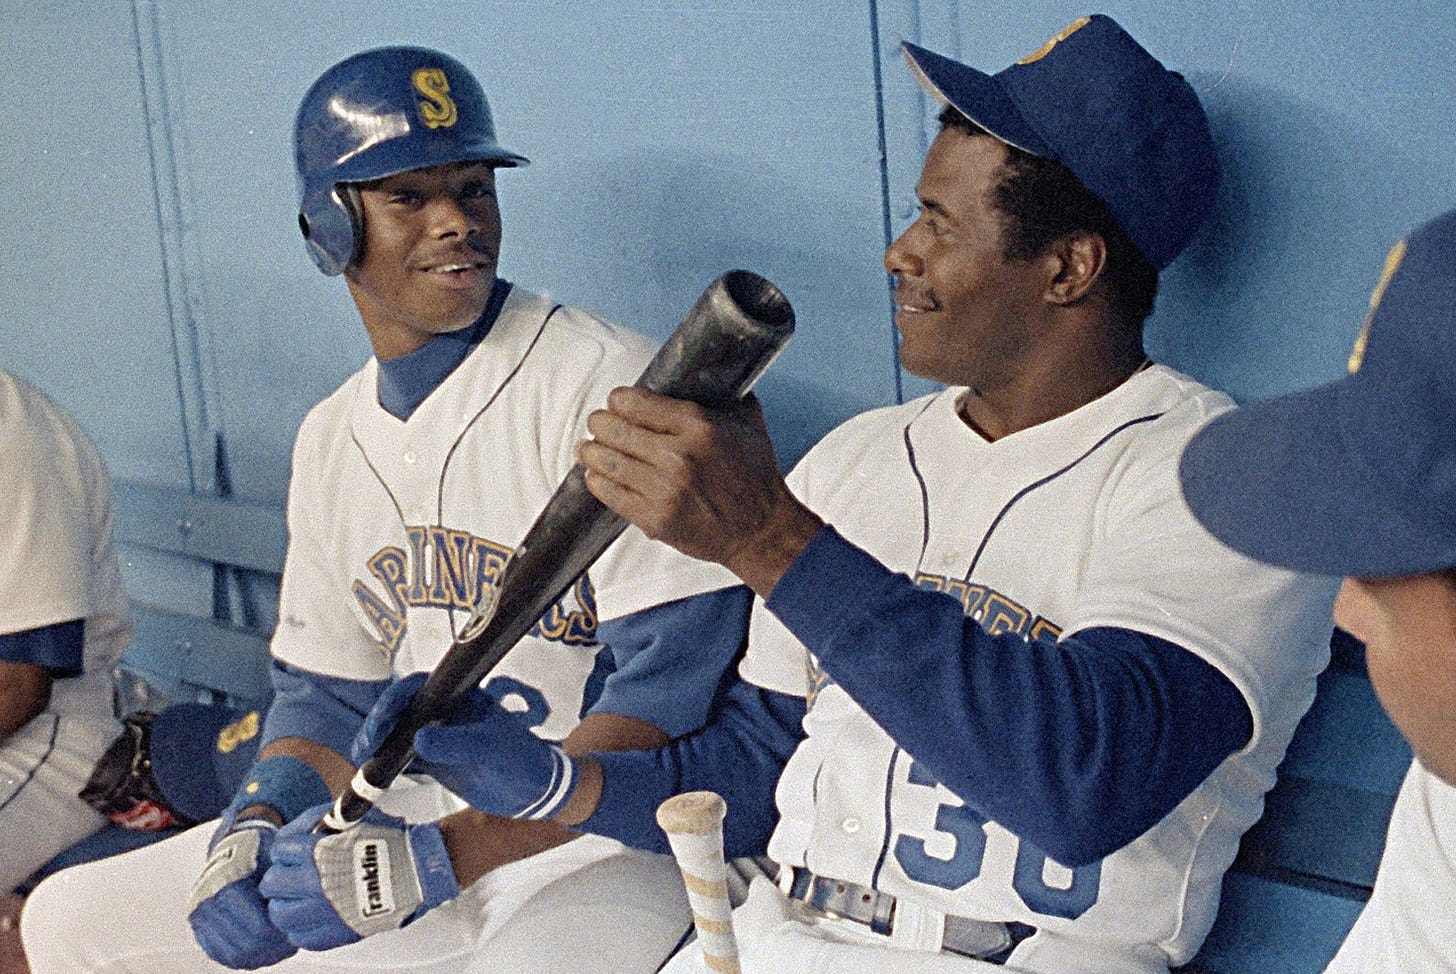 Ken Griffey Jr. opens up about fatherhood and Griffey Sr. in 'Junior'  documentary on Father's Day | The Seattle Times